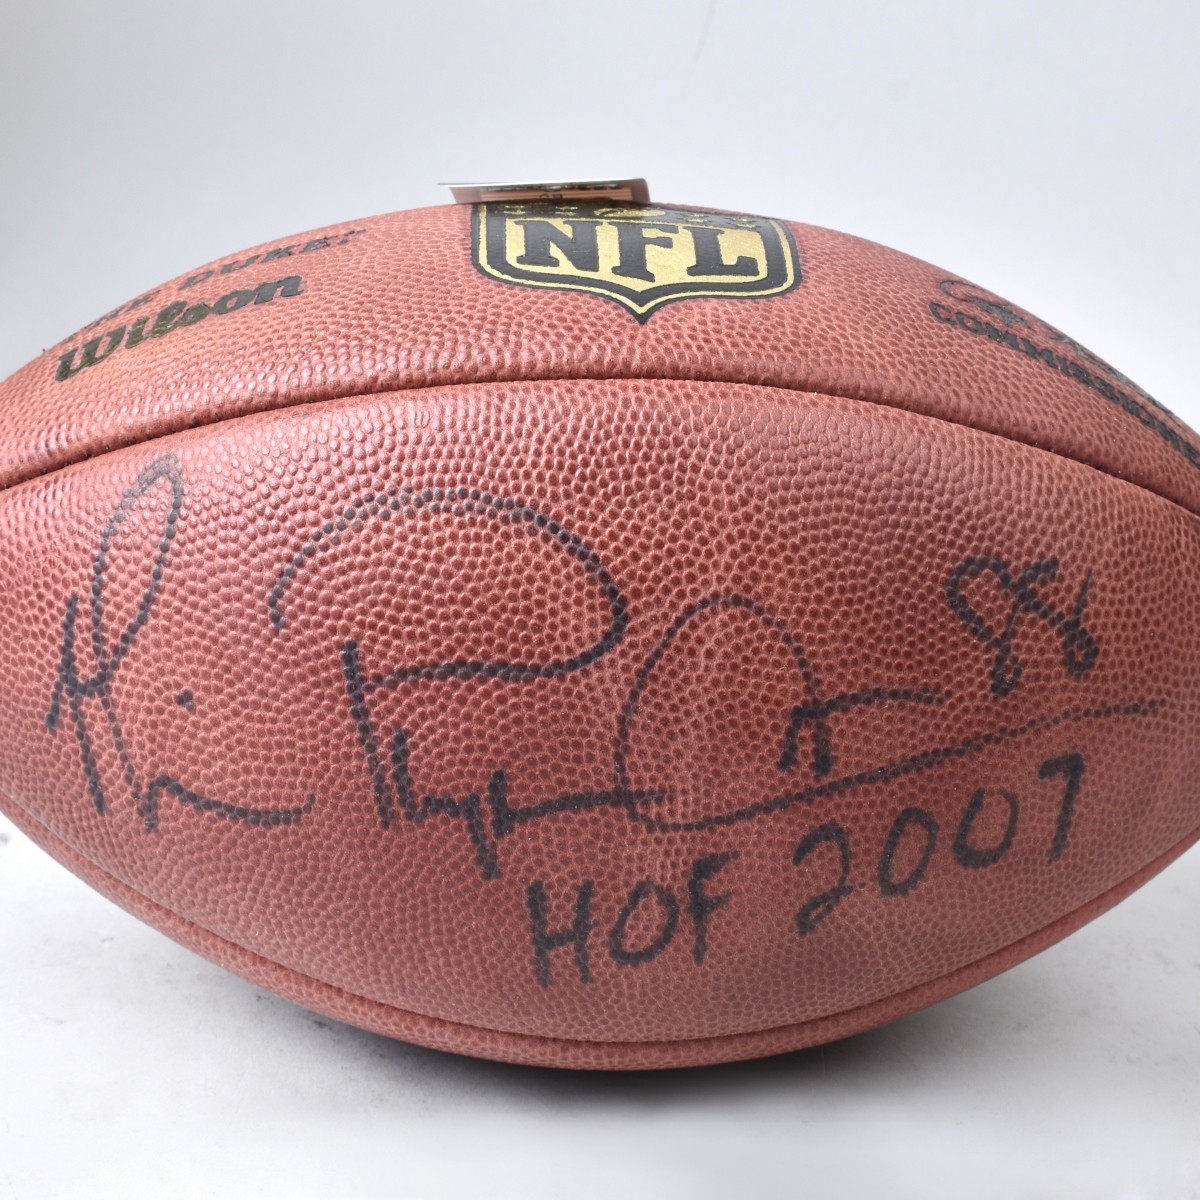 NFL Authentic Football signed Michael Irvin